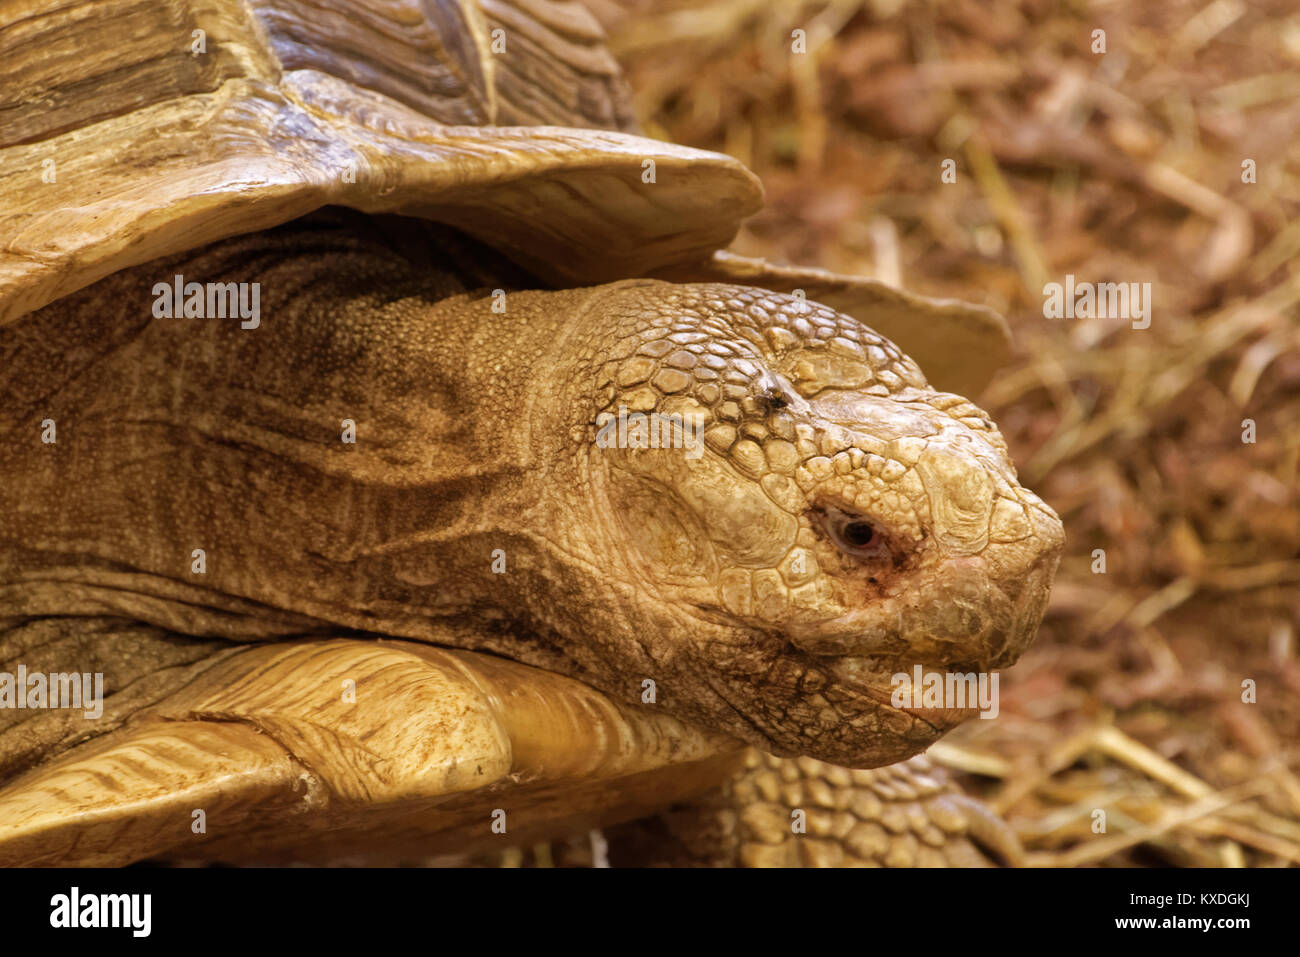 African spurred tortoise (Centrochelys sulcata), also called the sulcata tortoise, is a species of tortoise, which inhabits the southern edge of the S Stock Photo